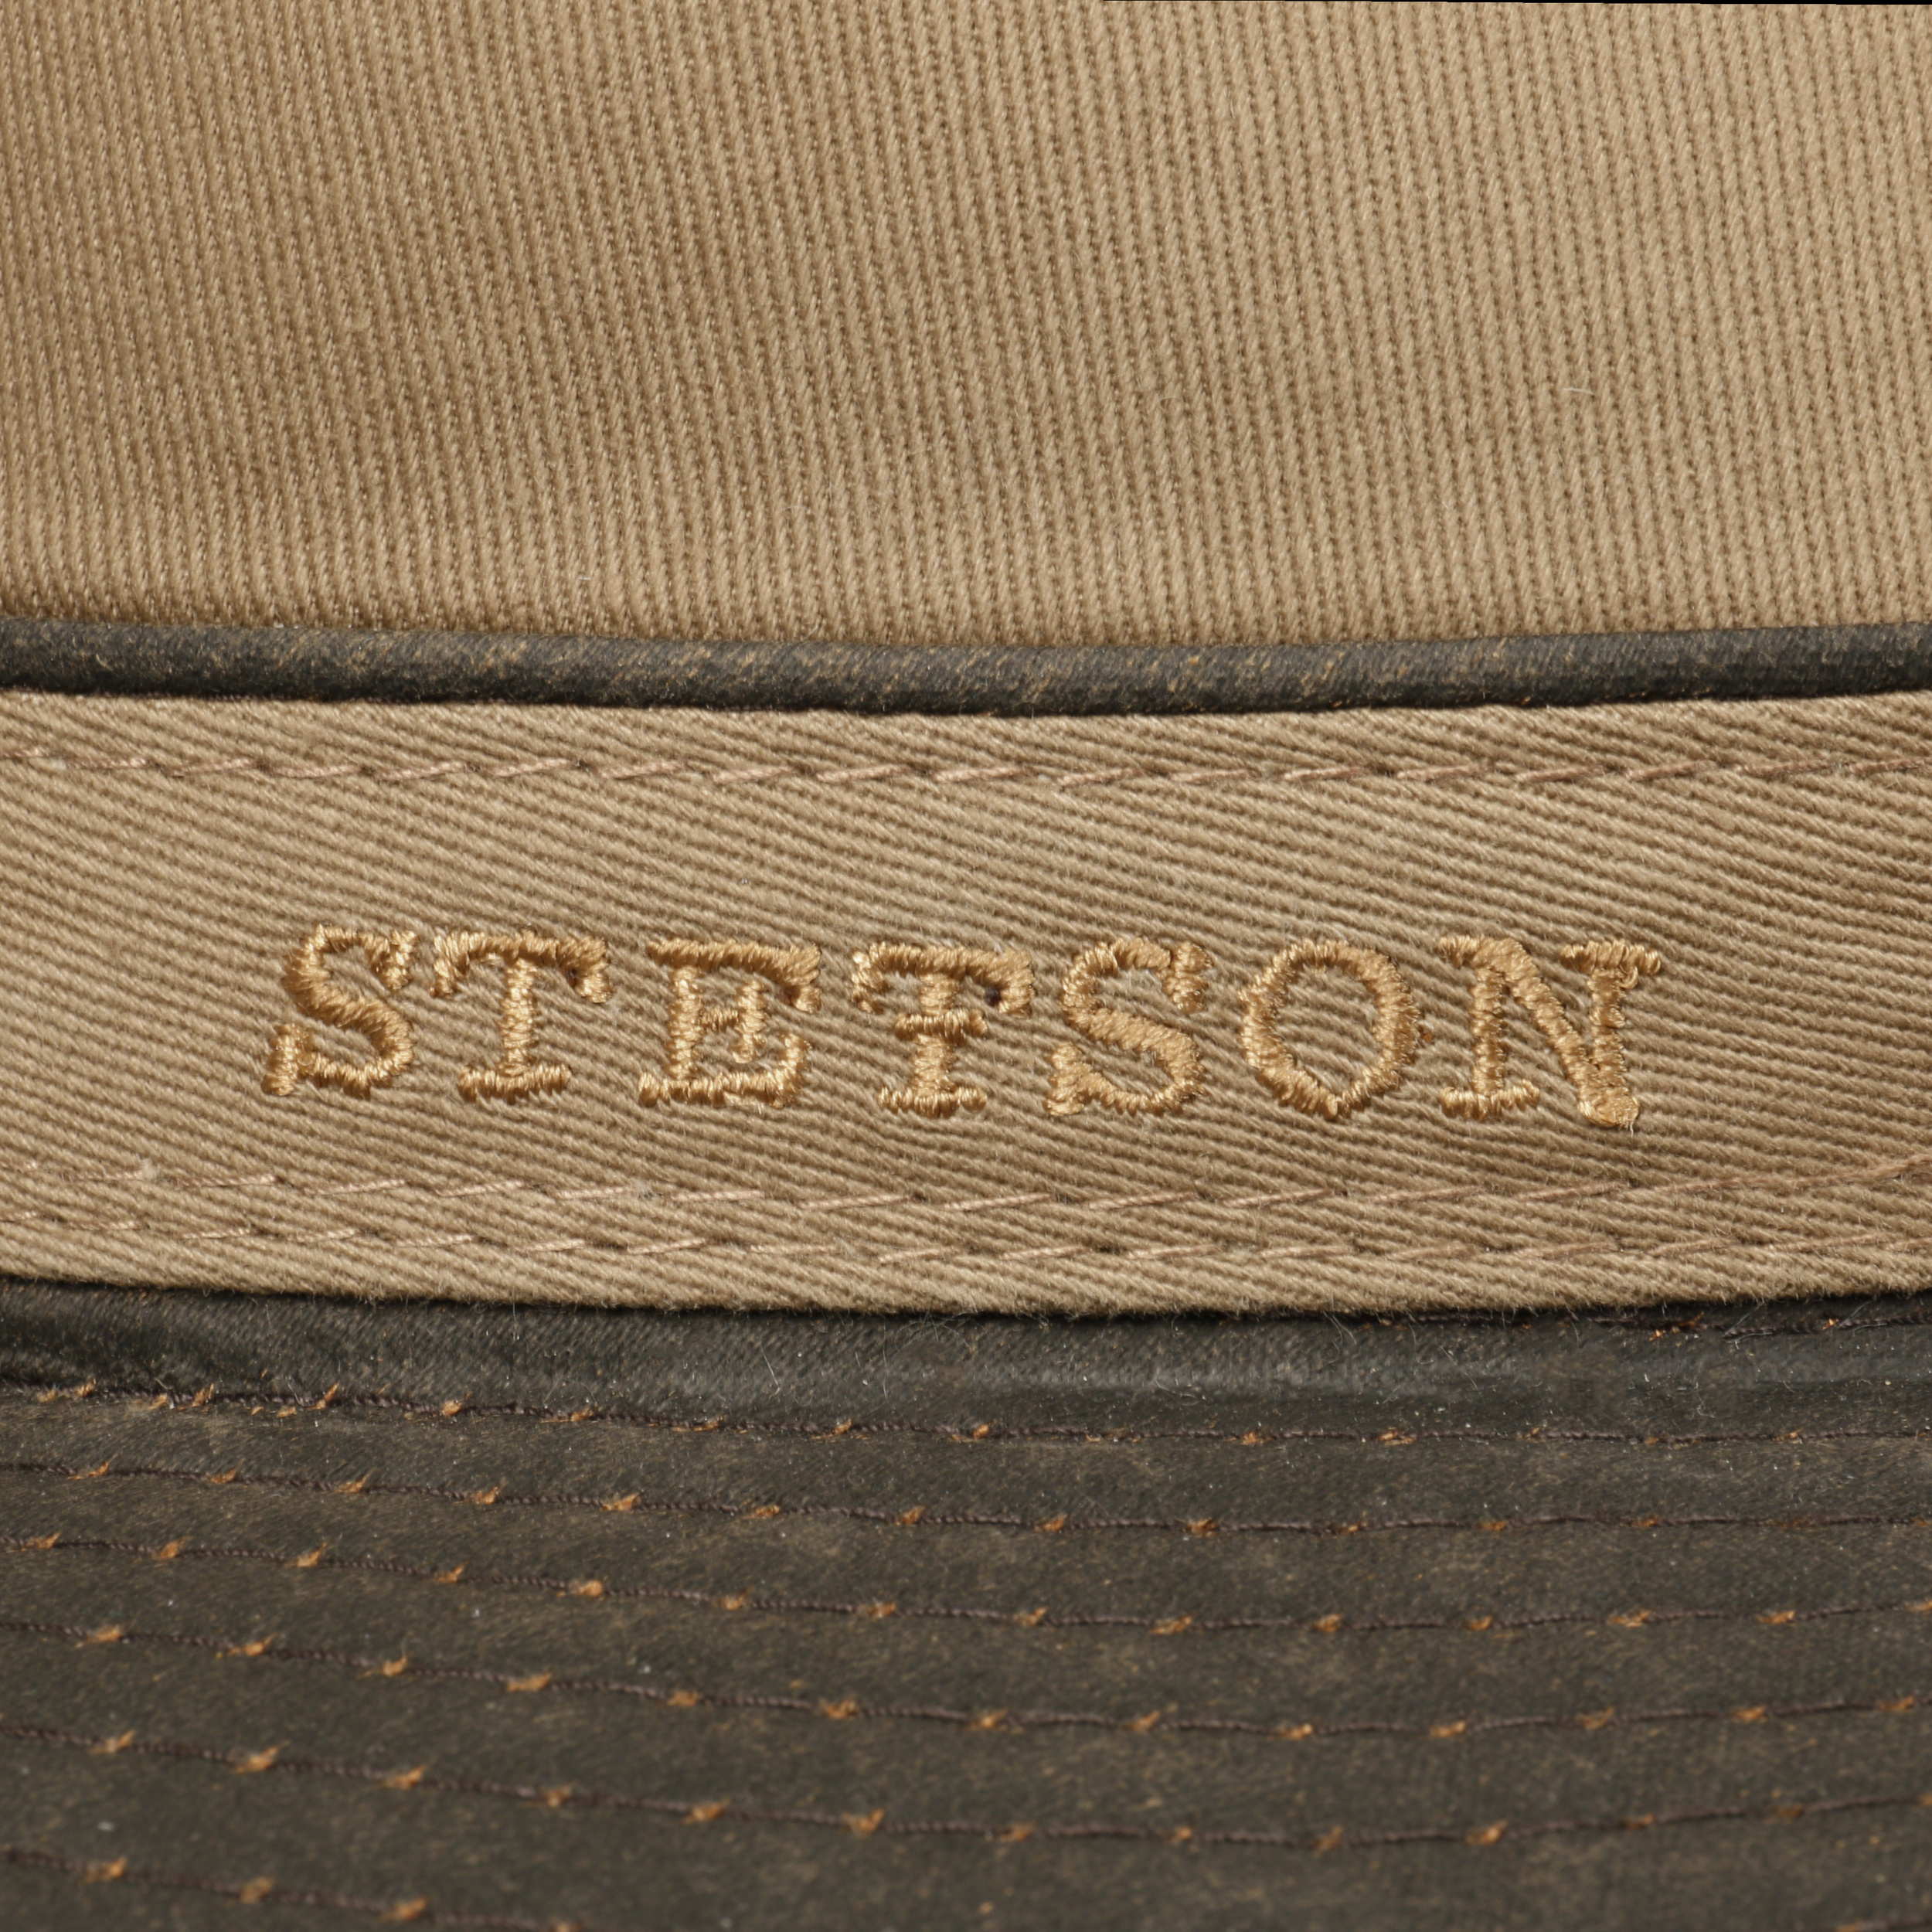 UV Protection Cotton Hat by Stetson - 69,00